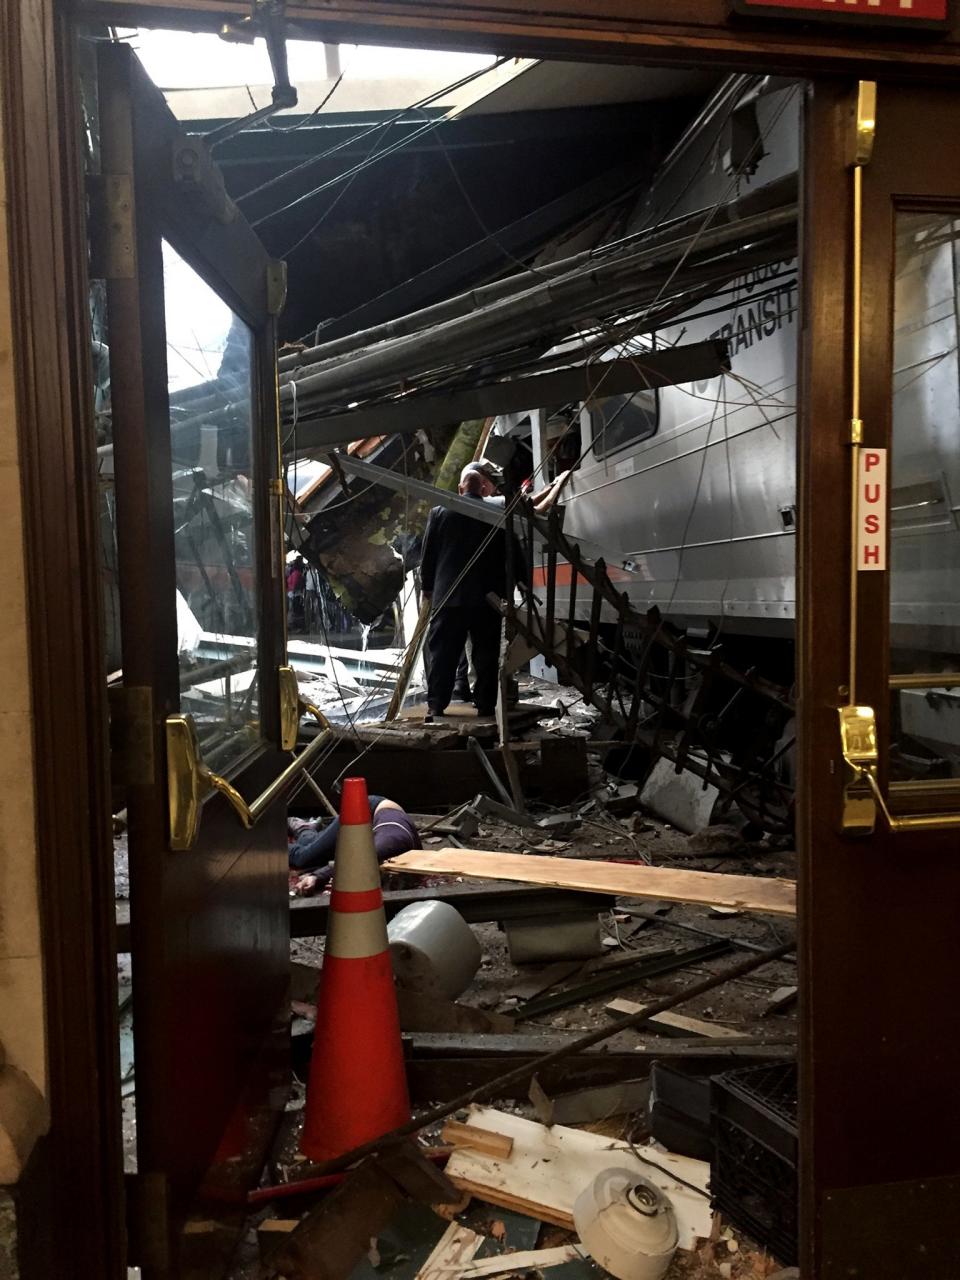 <p>A NJ Transit train seen through the wreckage after it crashed in to the platform at the Hoboken Terminal September 29, 2016 in Hoboken, New Jersey. (Pancho Bernasconi/Getty Images) </p>